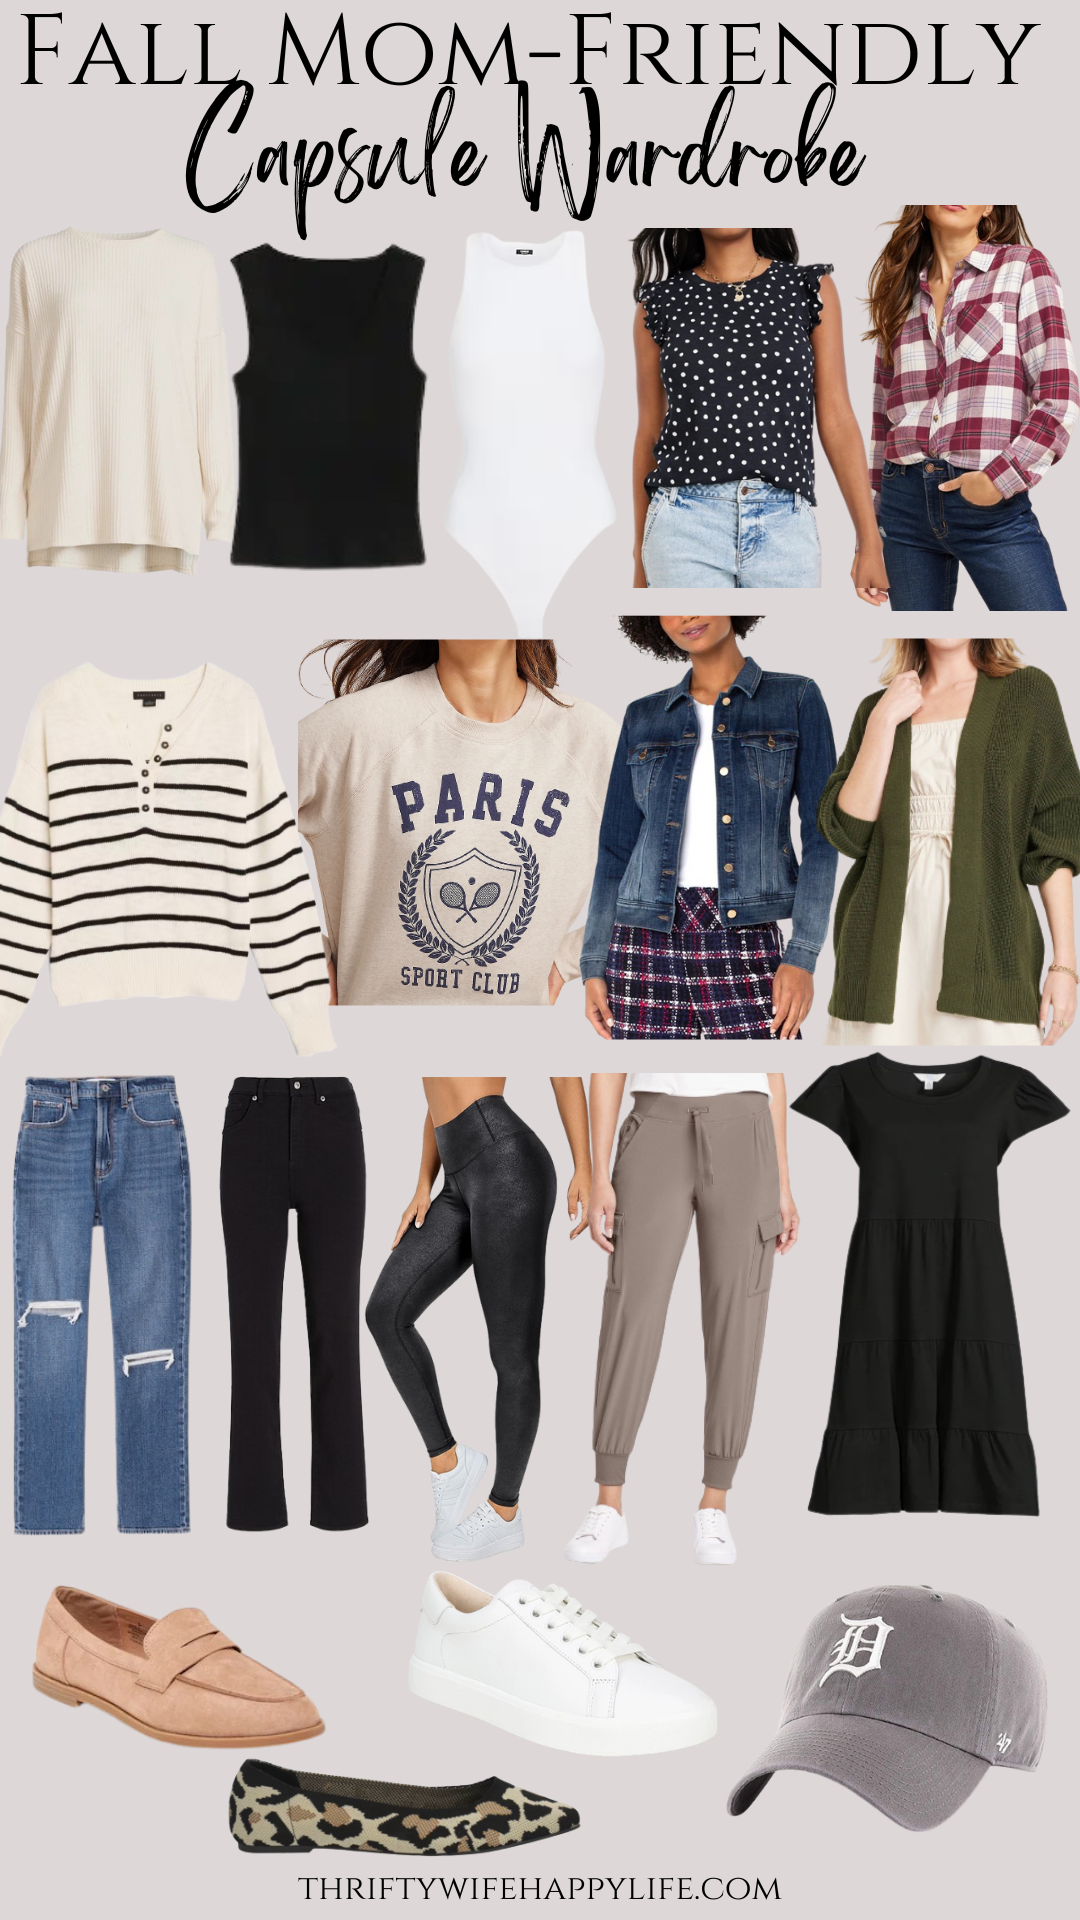 9 Must-Have Fall Fashion Trends From maurices